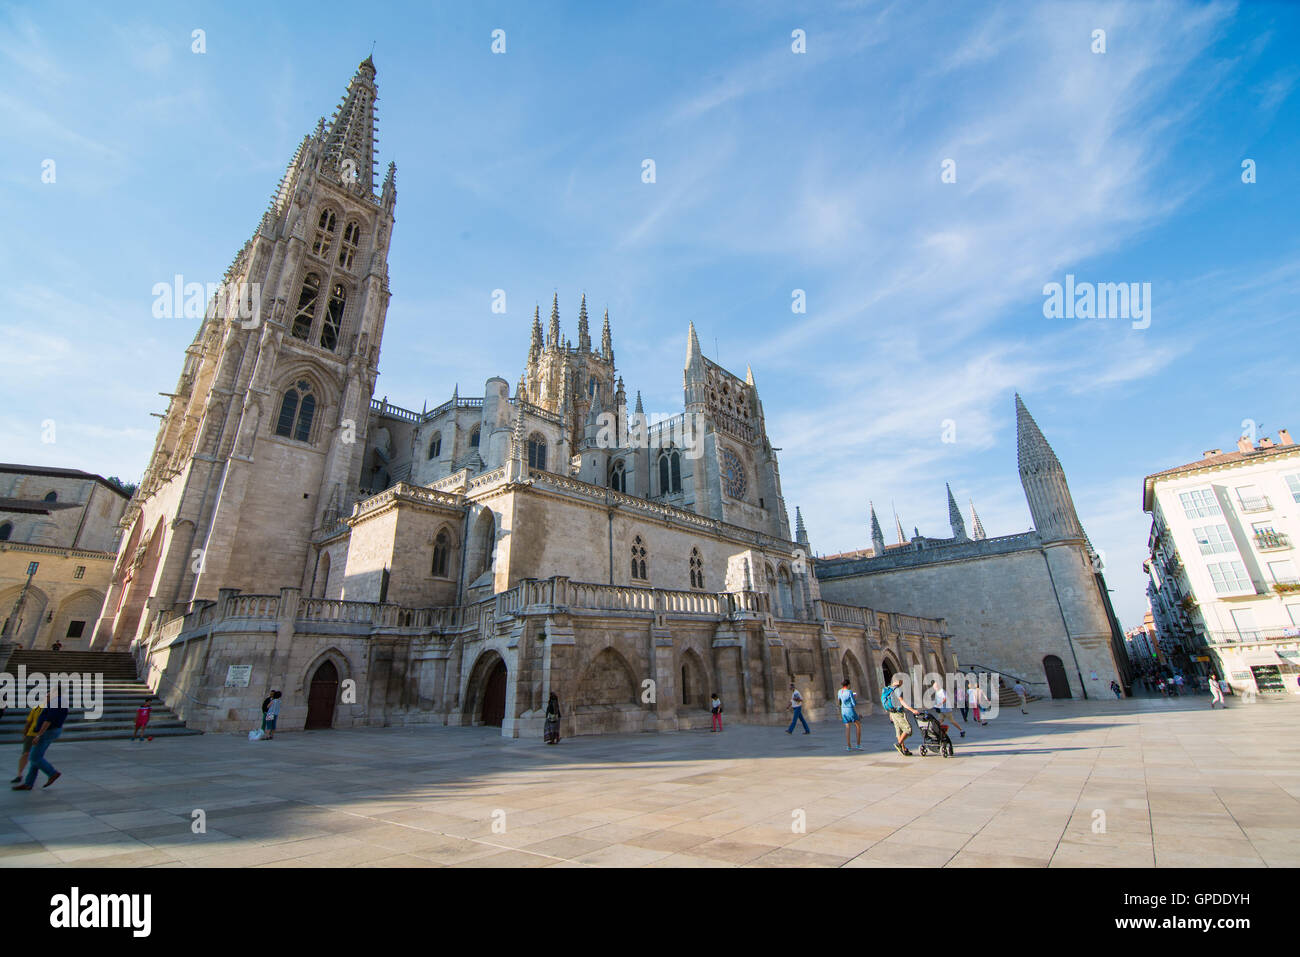 BURGOS, SPAIN - 31 AUGUST, 2016: Construction on Burgos' Gothic Cathedral began in 1221 and spanned mainly from the 13th to 15th Stock Photo